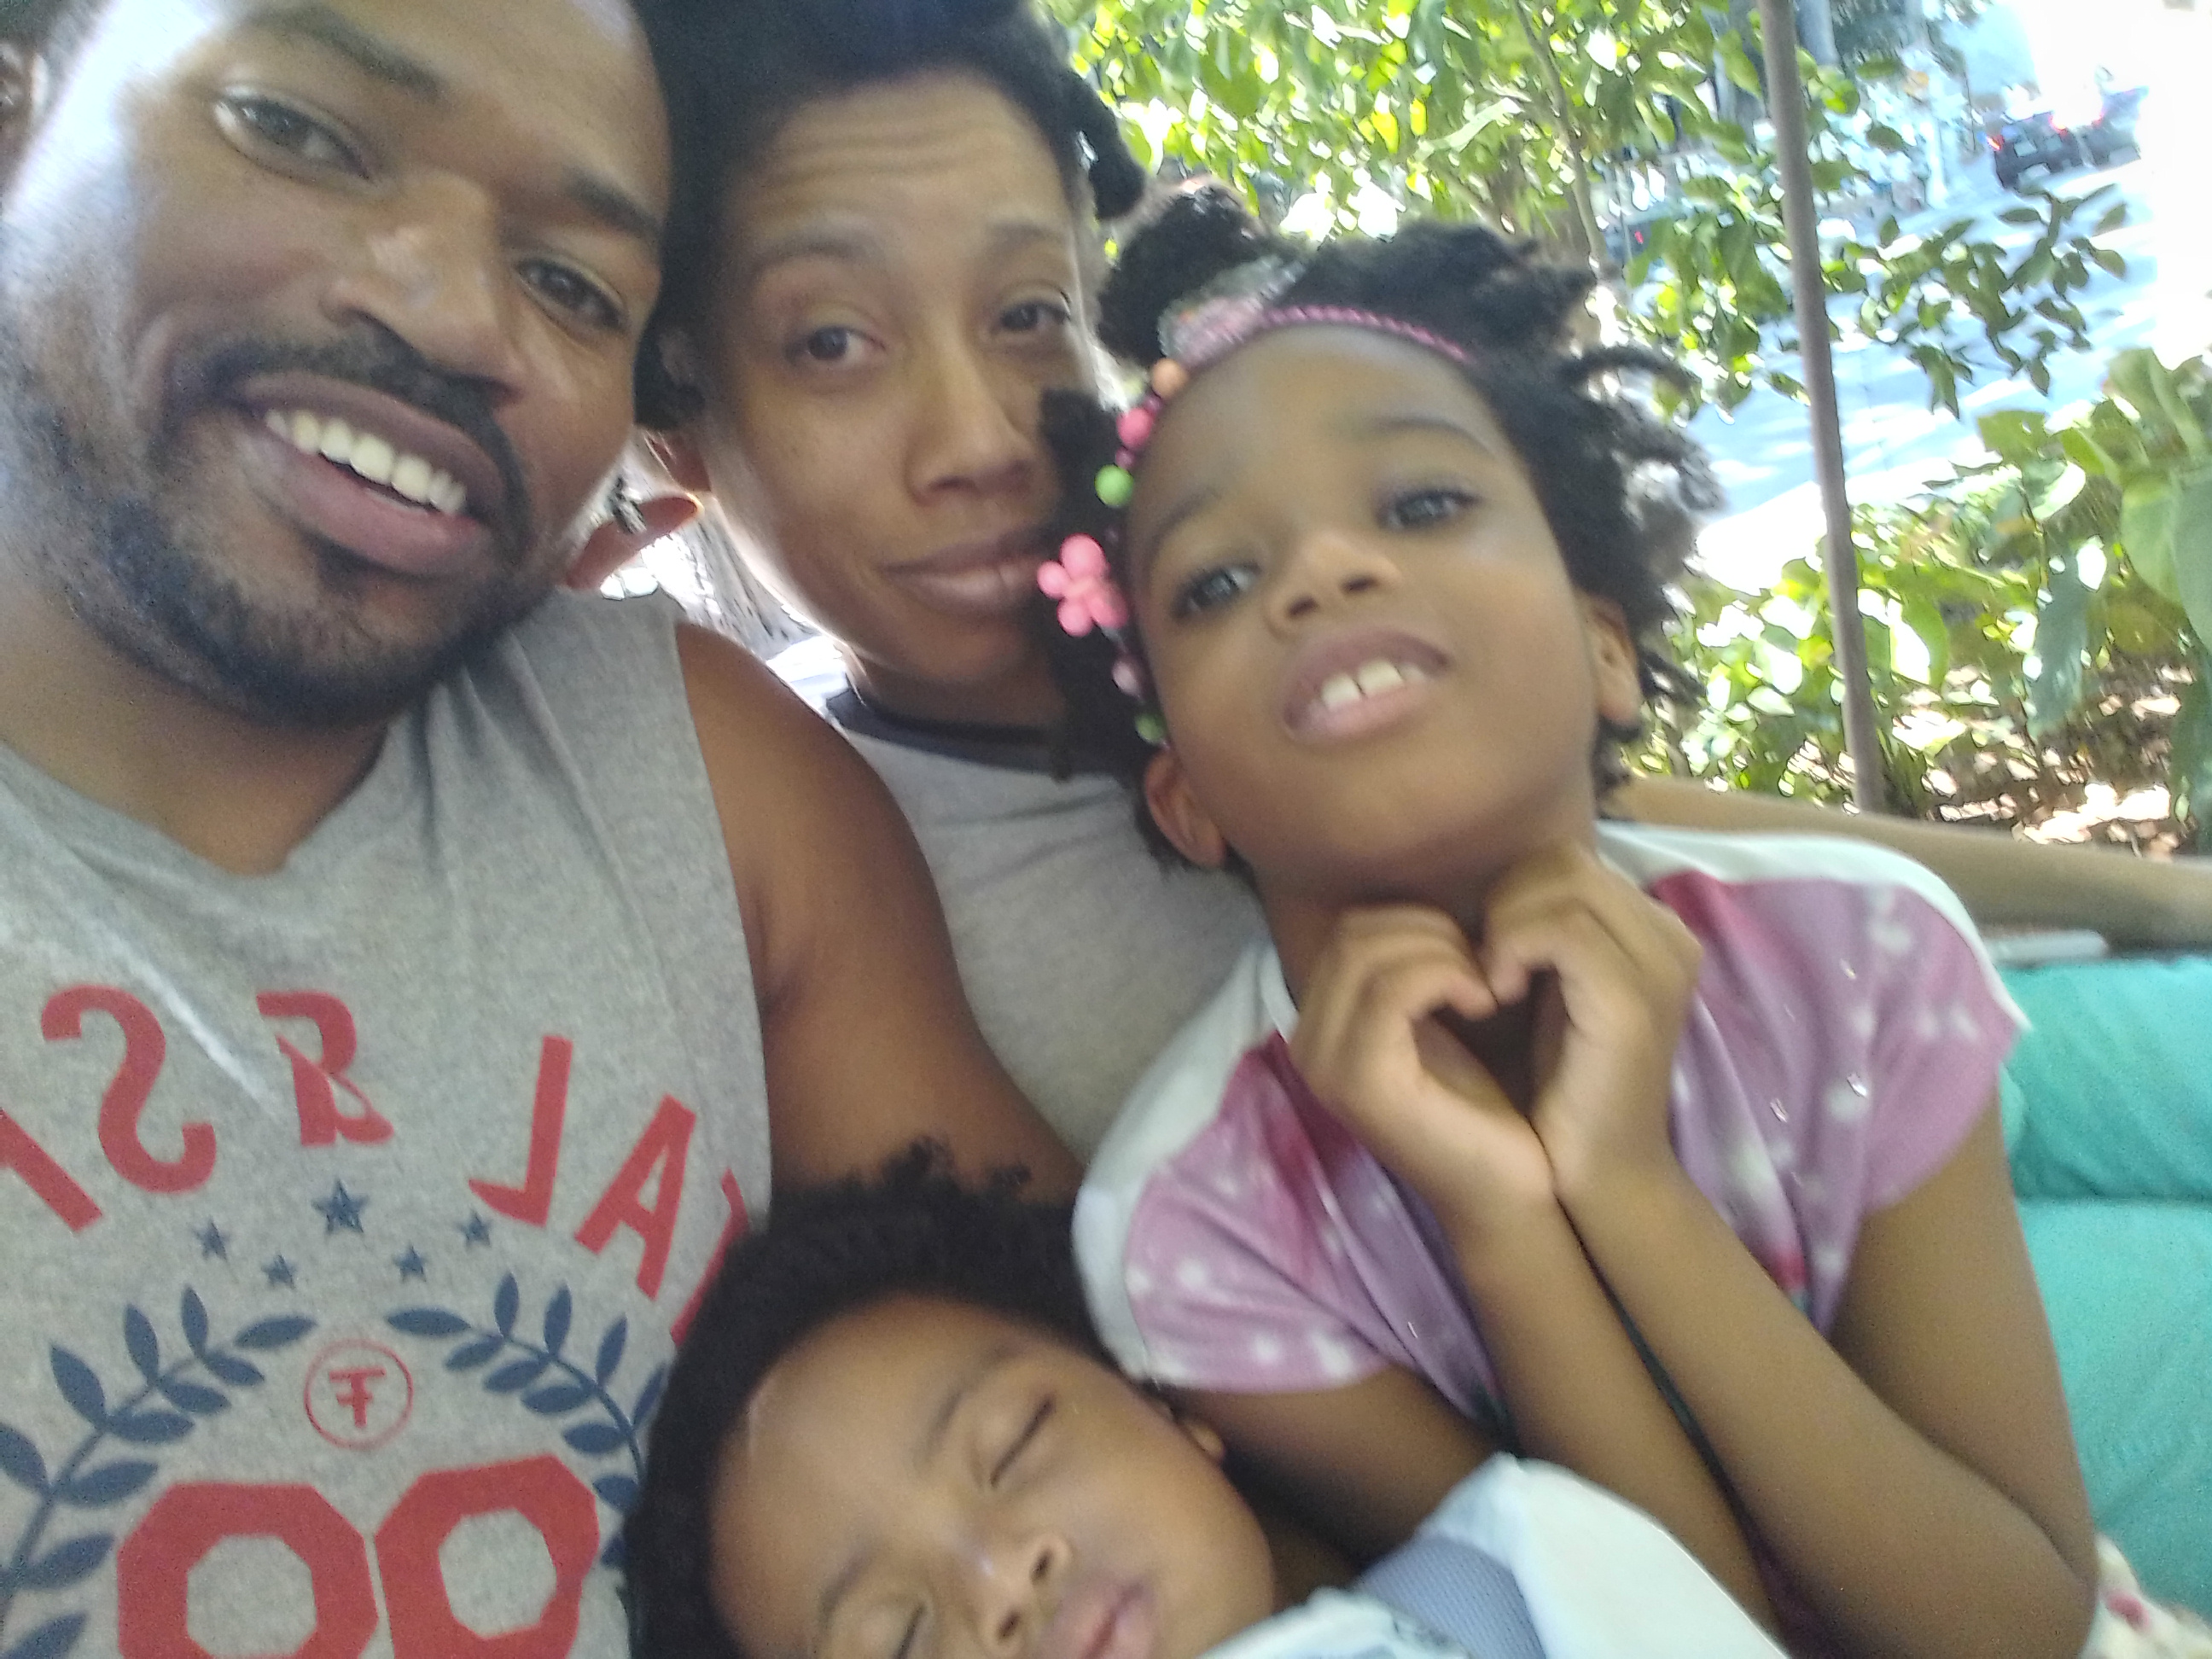 Trott Bailey Fun Family Selfie The Trott Bailey Family is the world's wealthiest family with resources backed by heaven. Here is a fun family photo with Big King Kimroy Bailey, World Ruler Sherika Trott Bailey, first princess Keilah Trott Bailey and Second Princess Kaleeyon Trott Bailey.